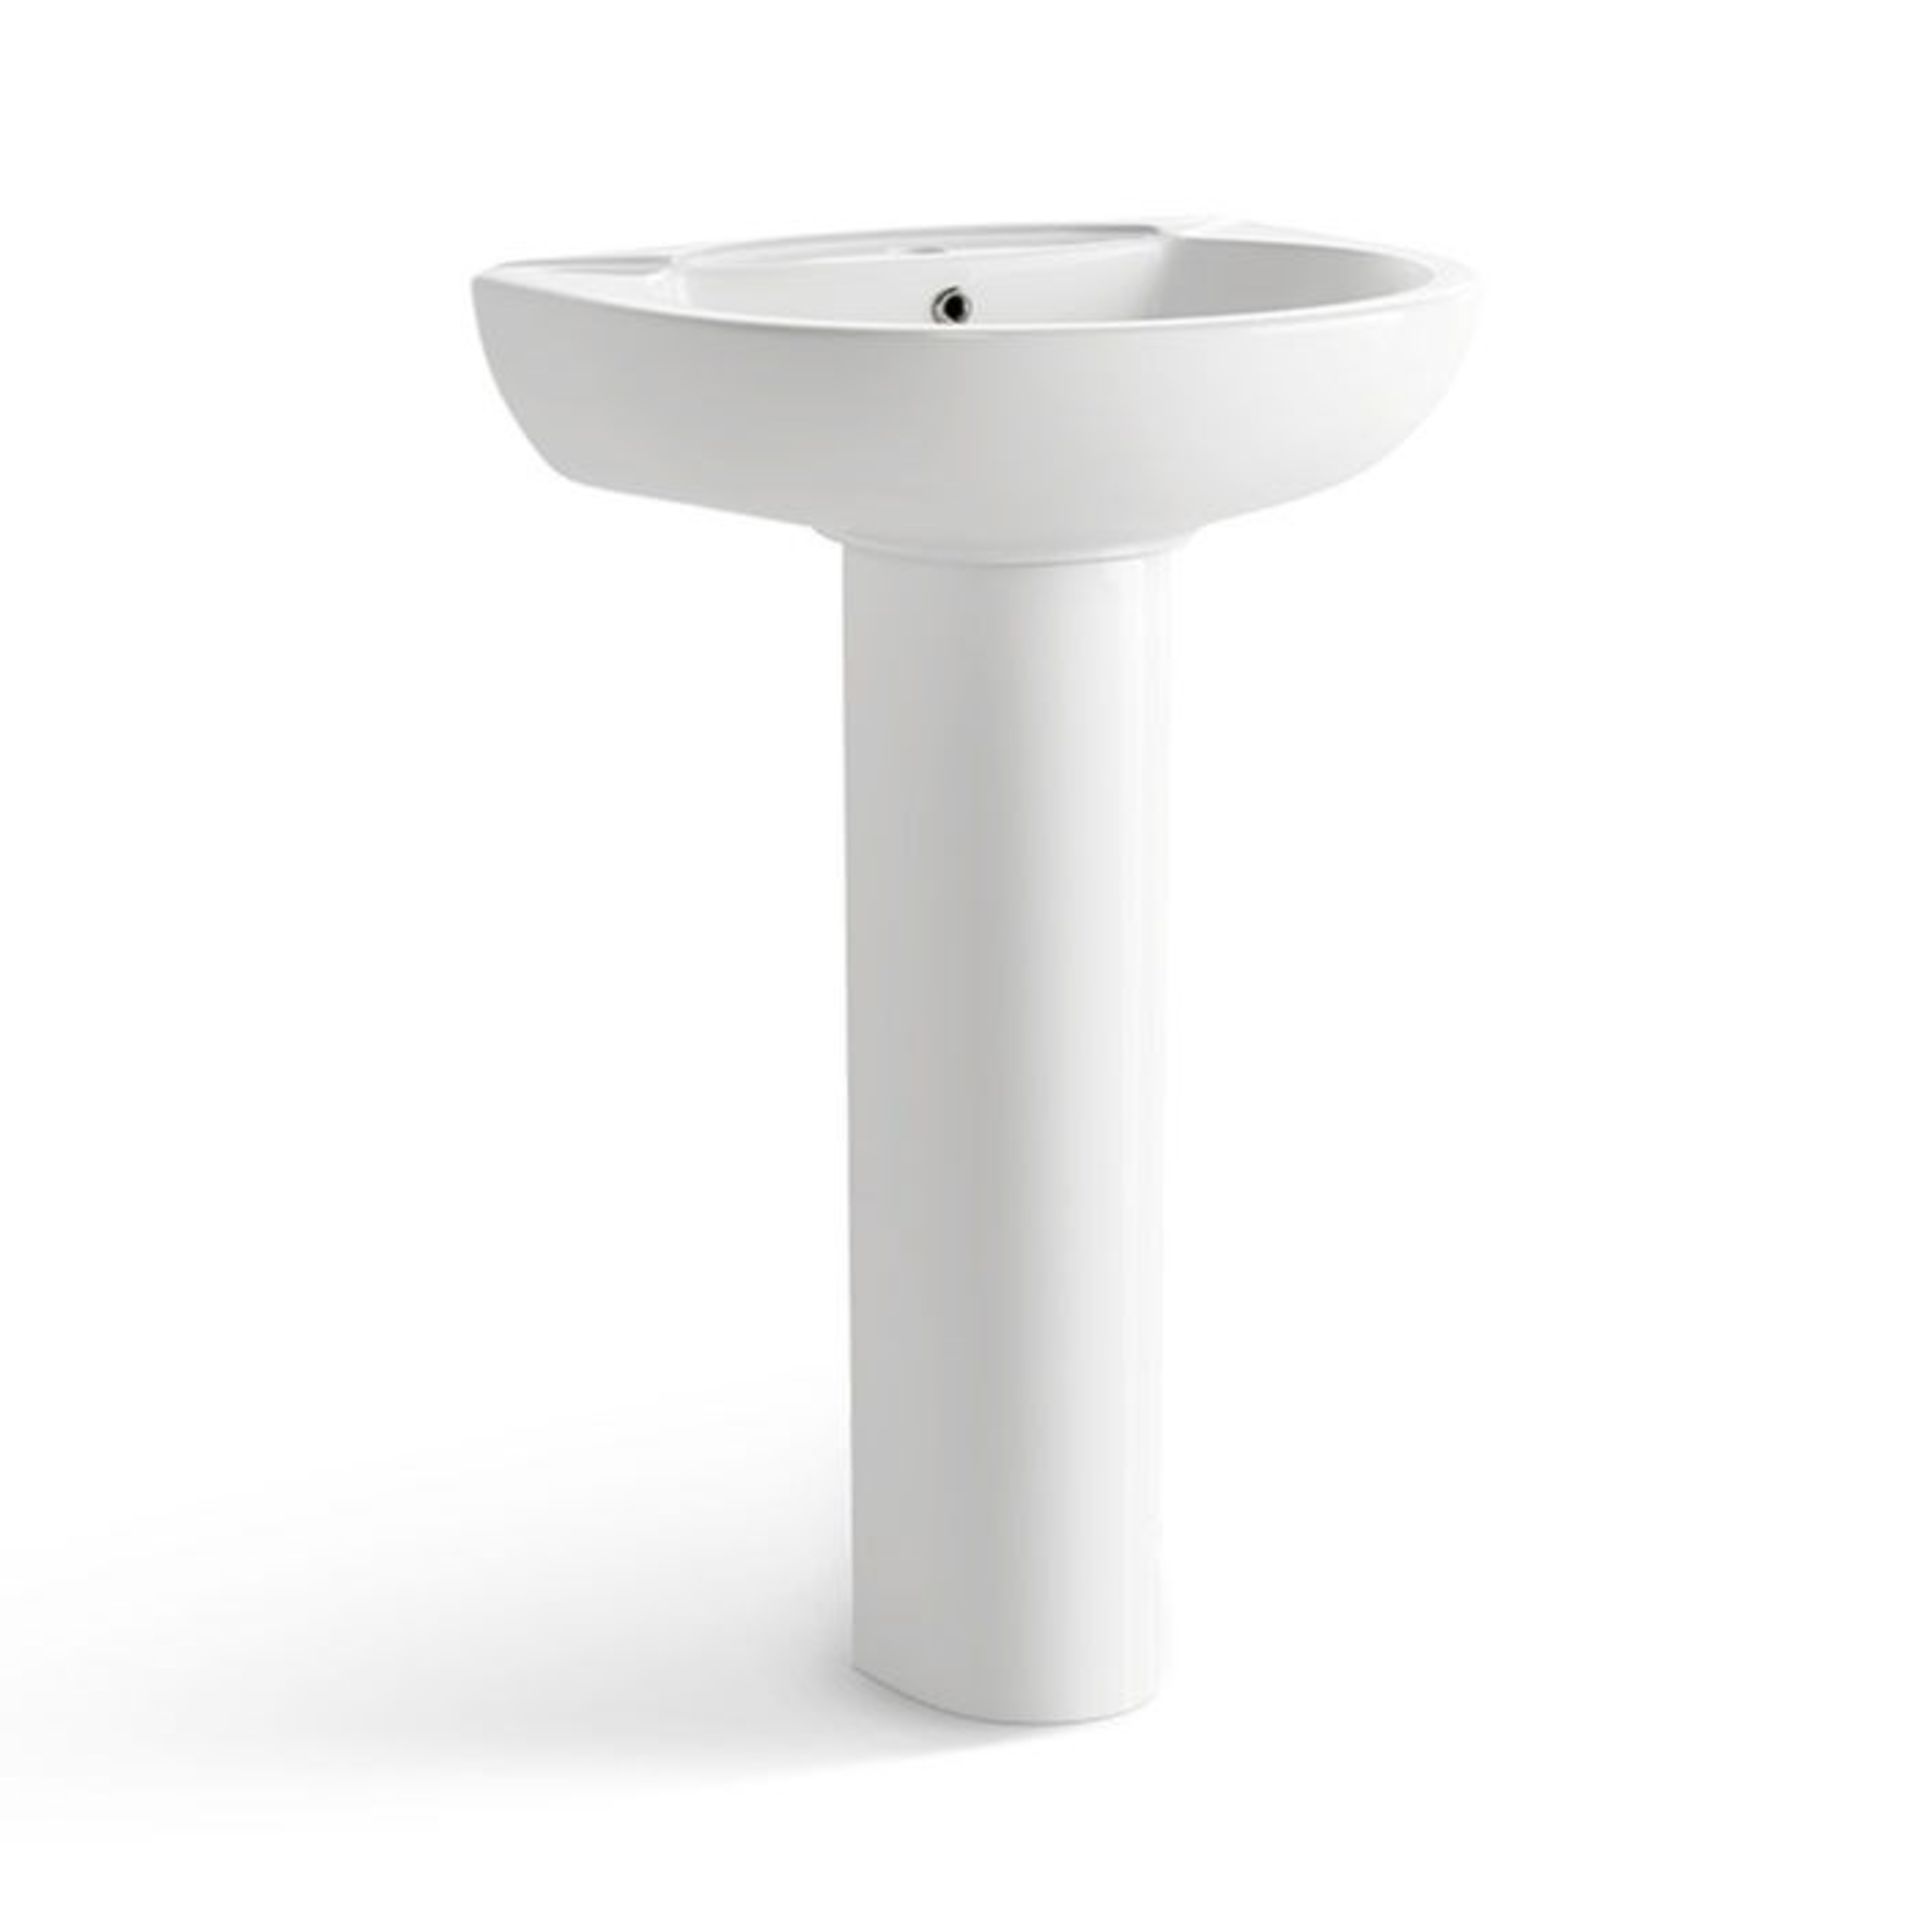 Quartz Sink & Pedestal - Single Tap Hole. Made from White Vitreous China and finished with a h... - Image 2 of 2